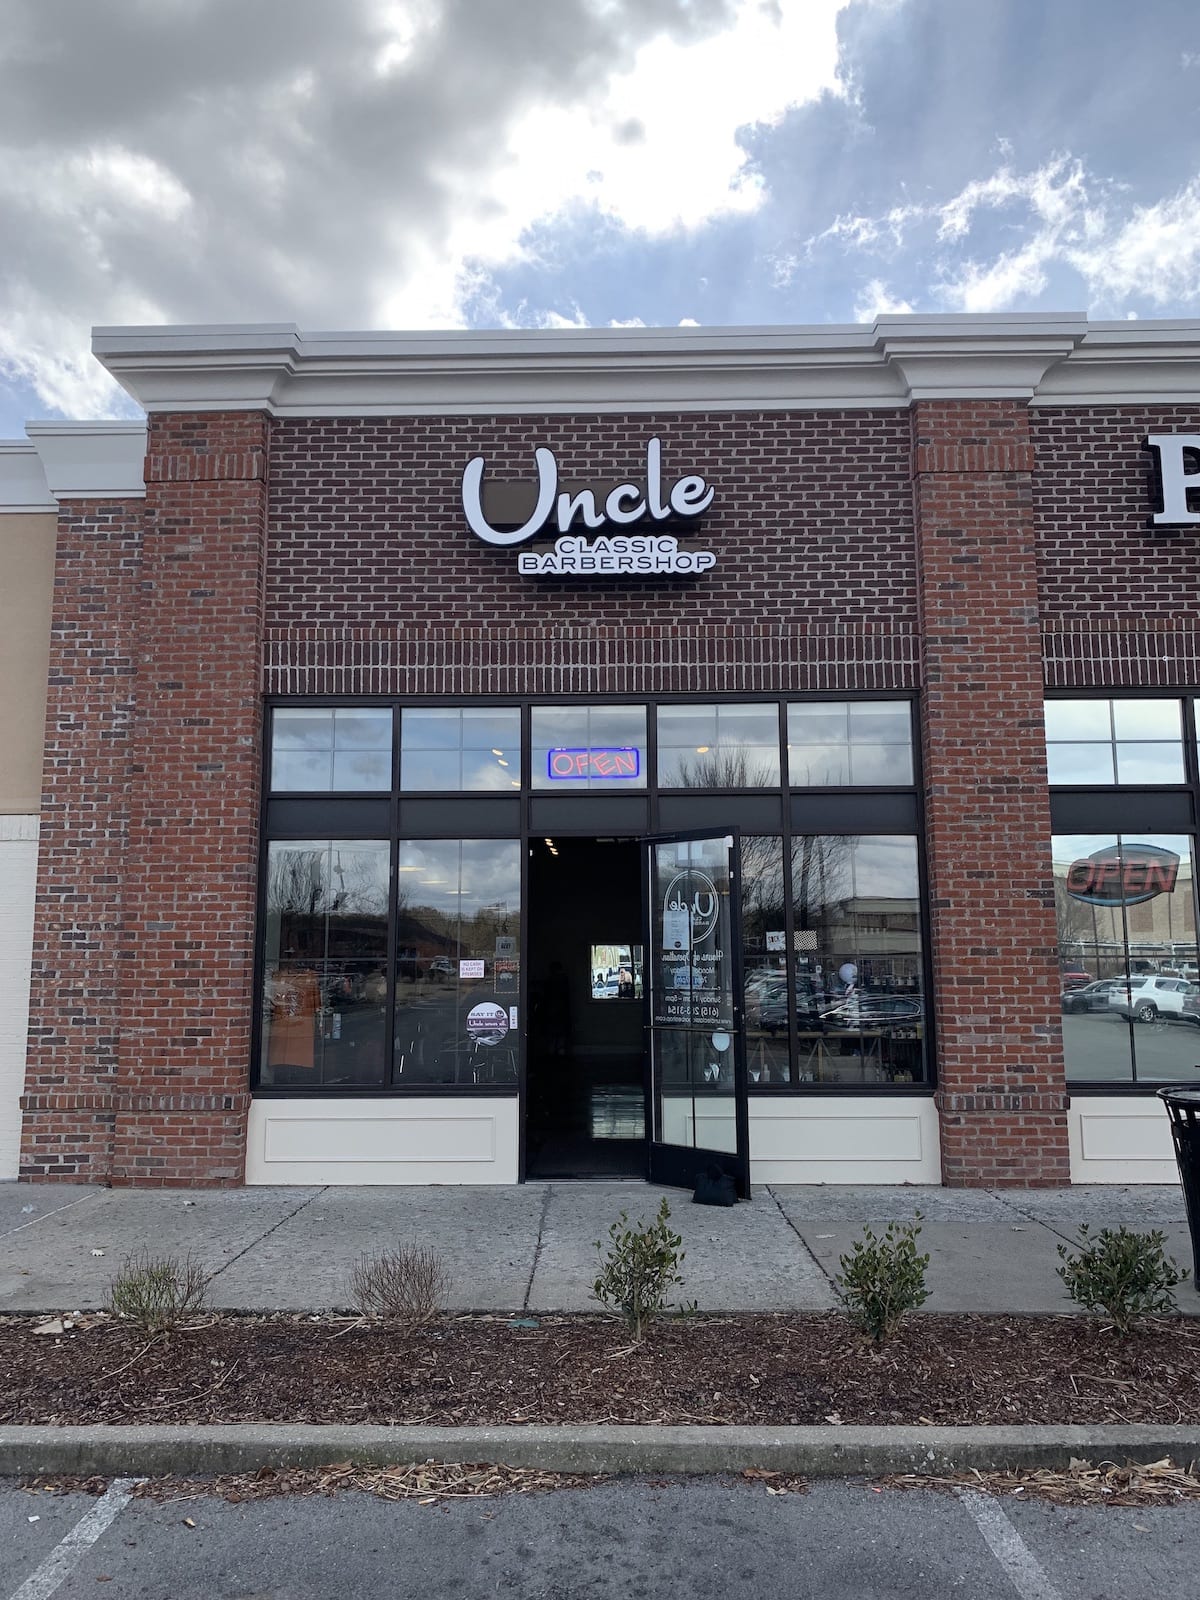 Exterior of the Nolensville location for Uncle Classic Barbershop